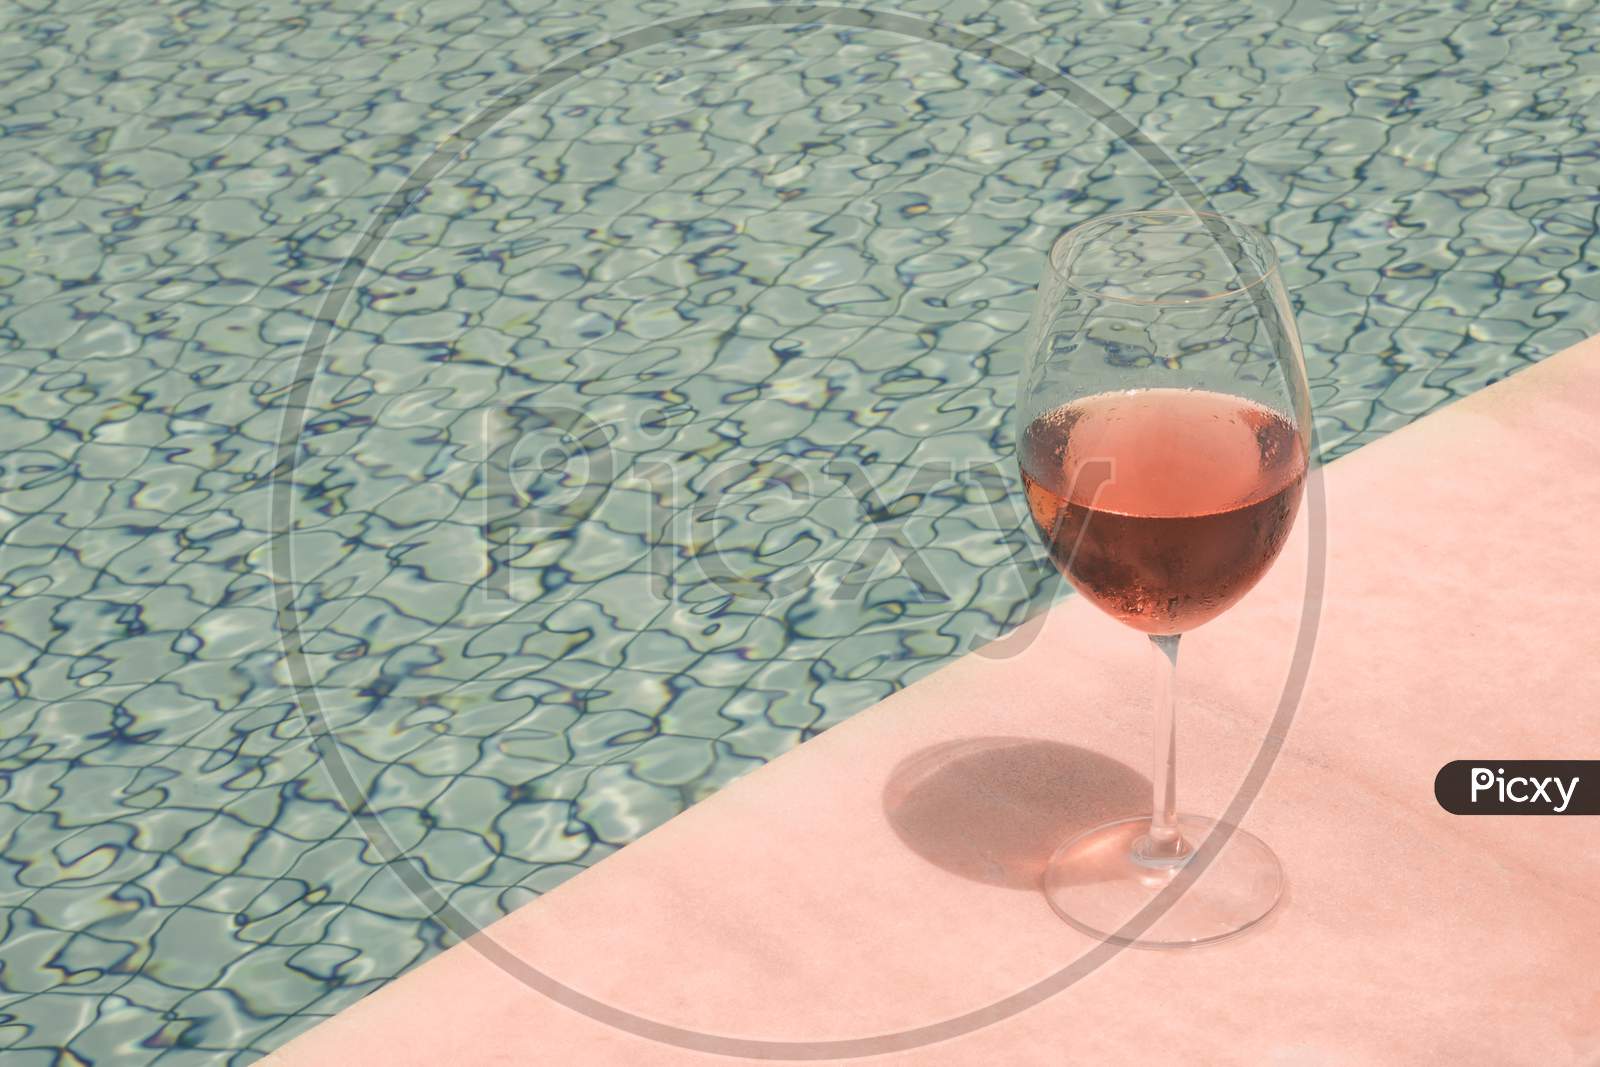 Crystal Goblet With Rose Wine On The Edge Of A Swimming Pool. High Class People Drink Concept.